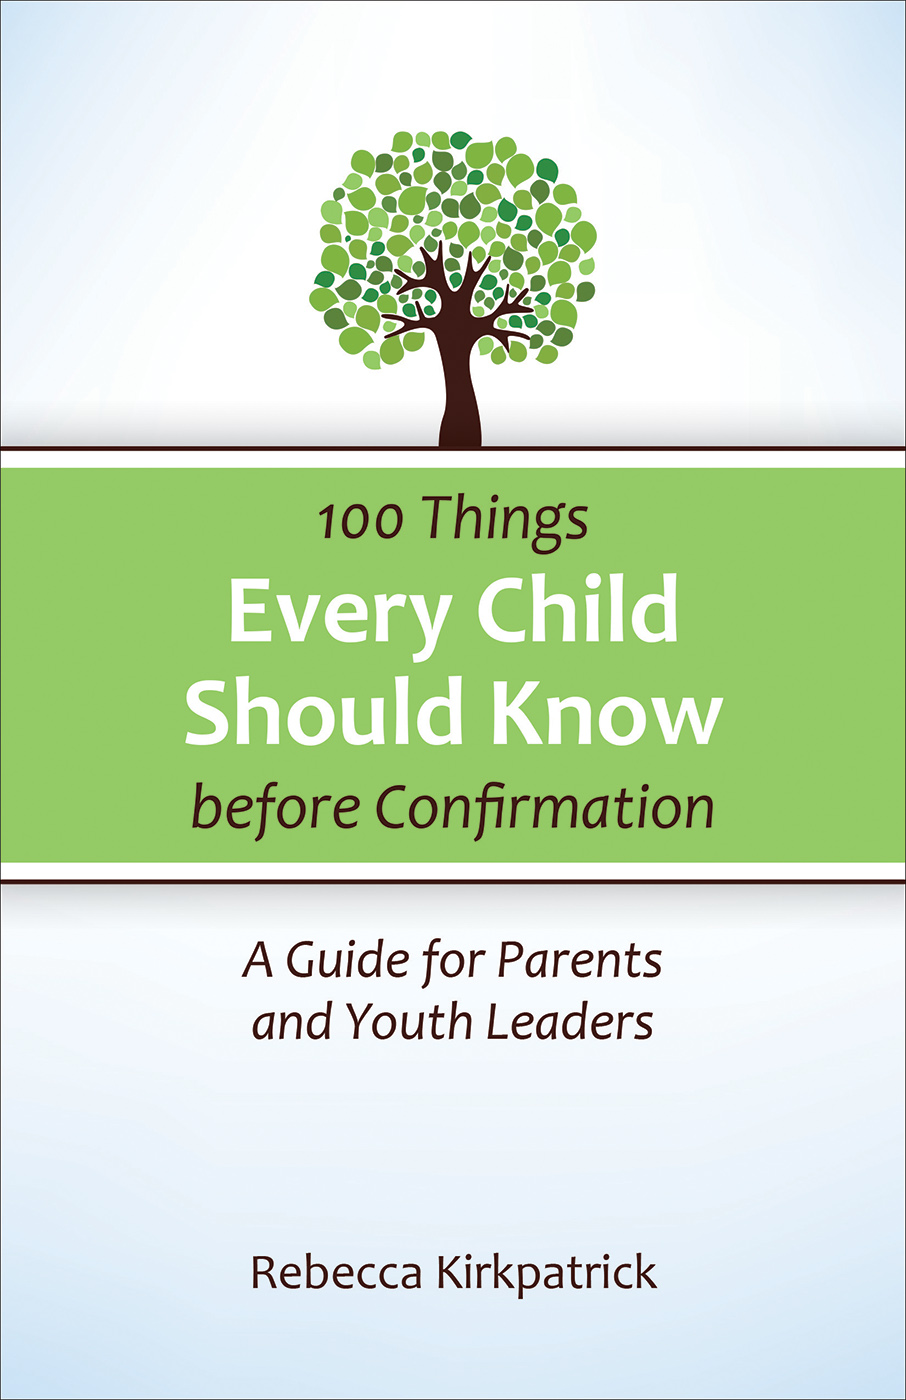 100 Things Every Child Should Know before Confirmation